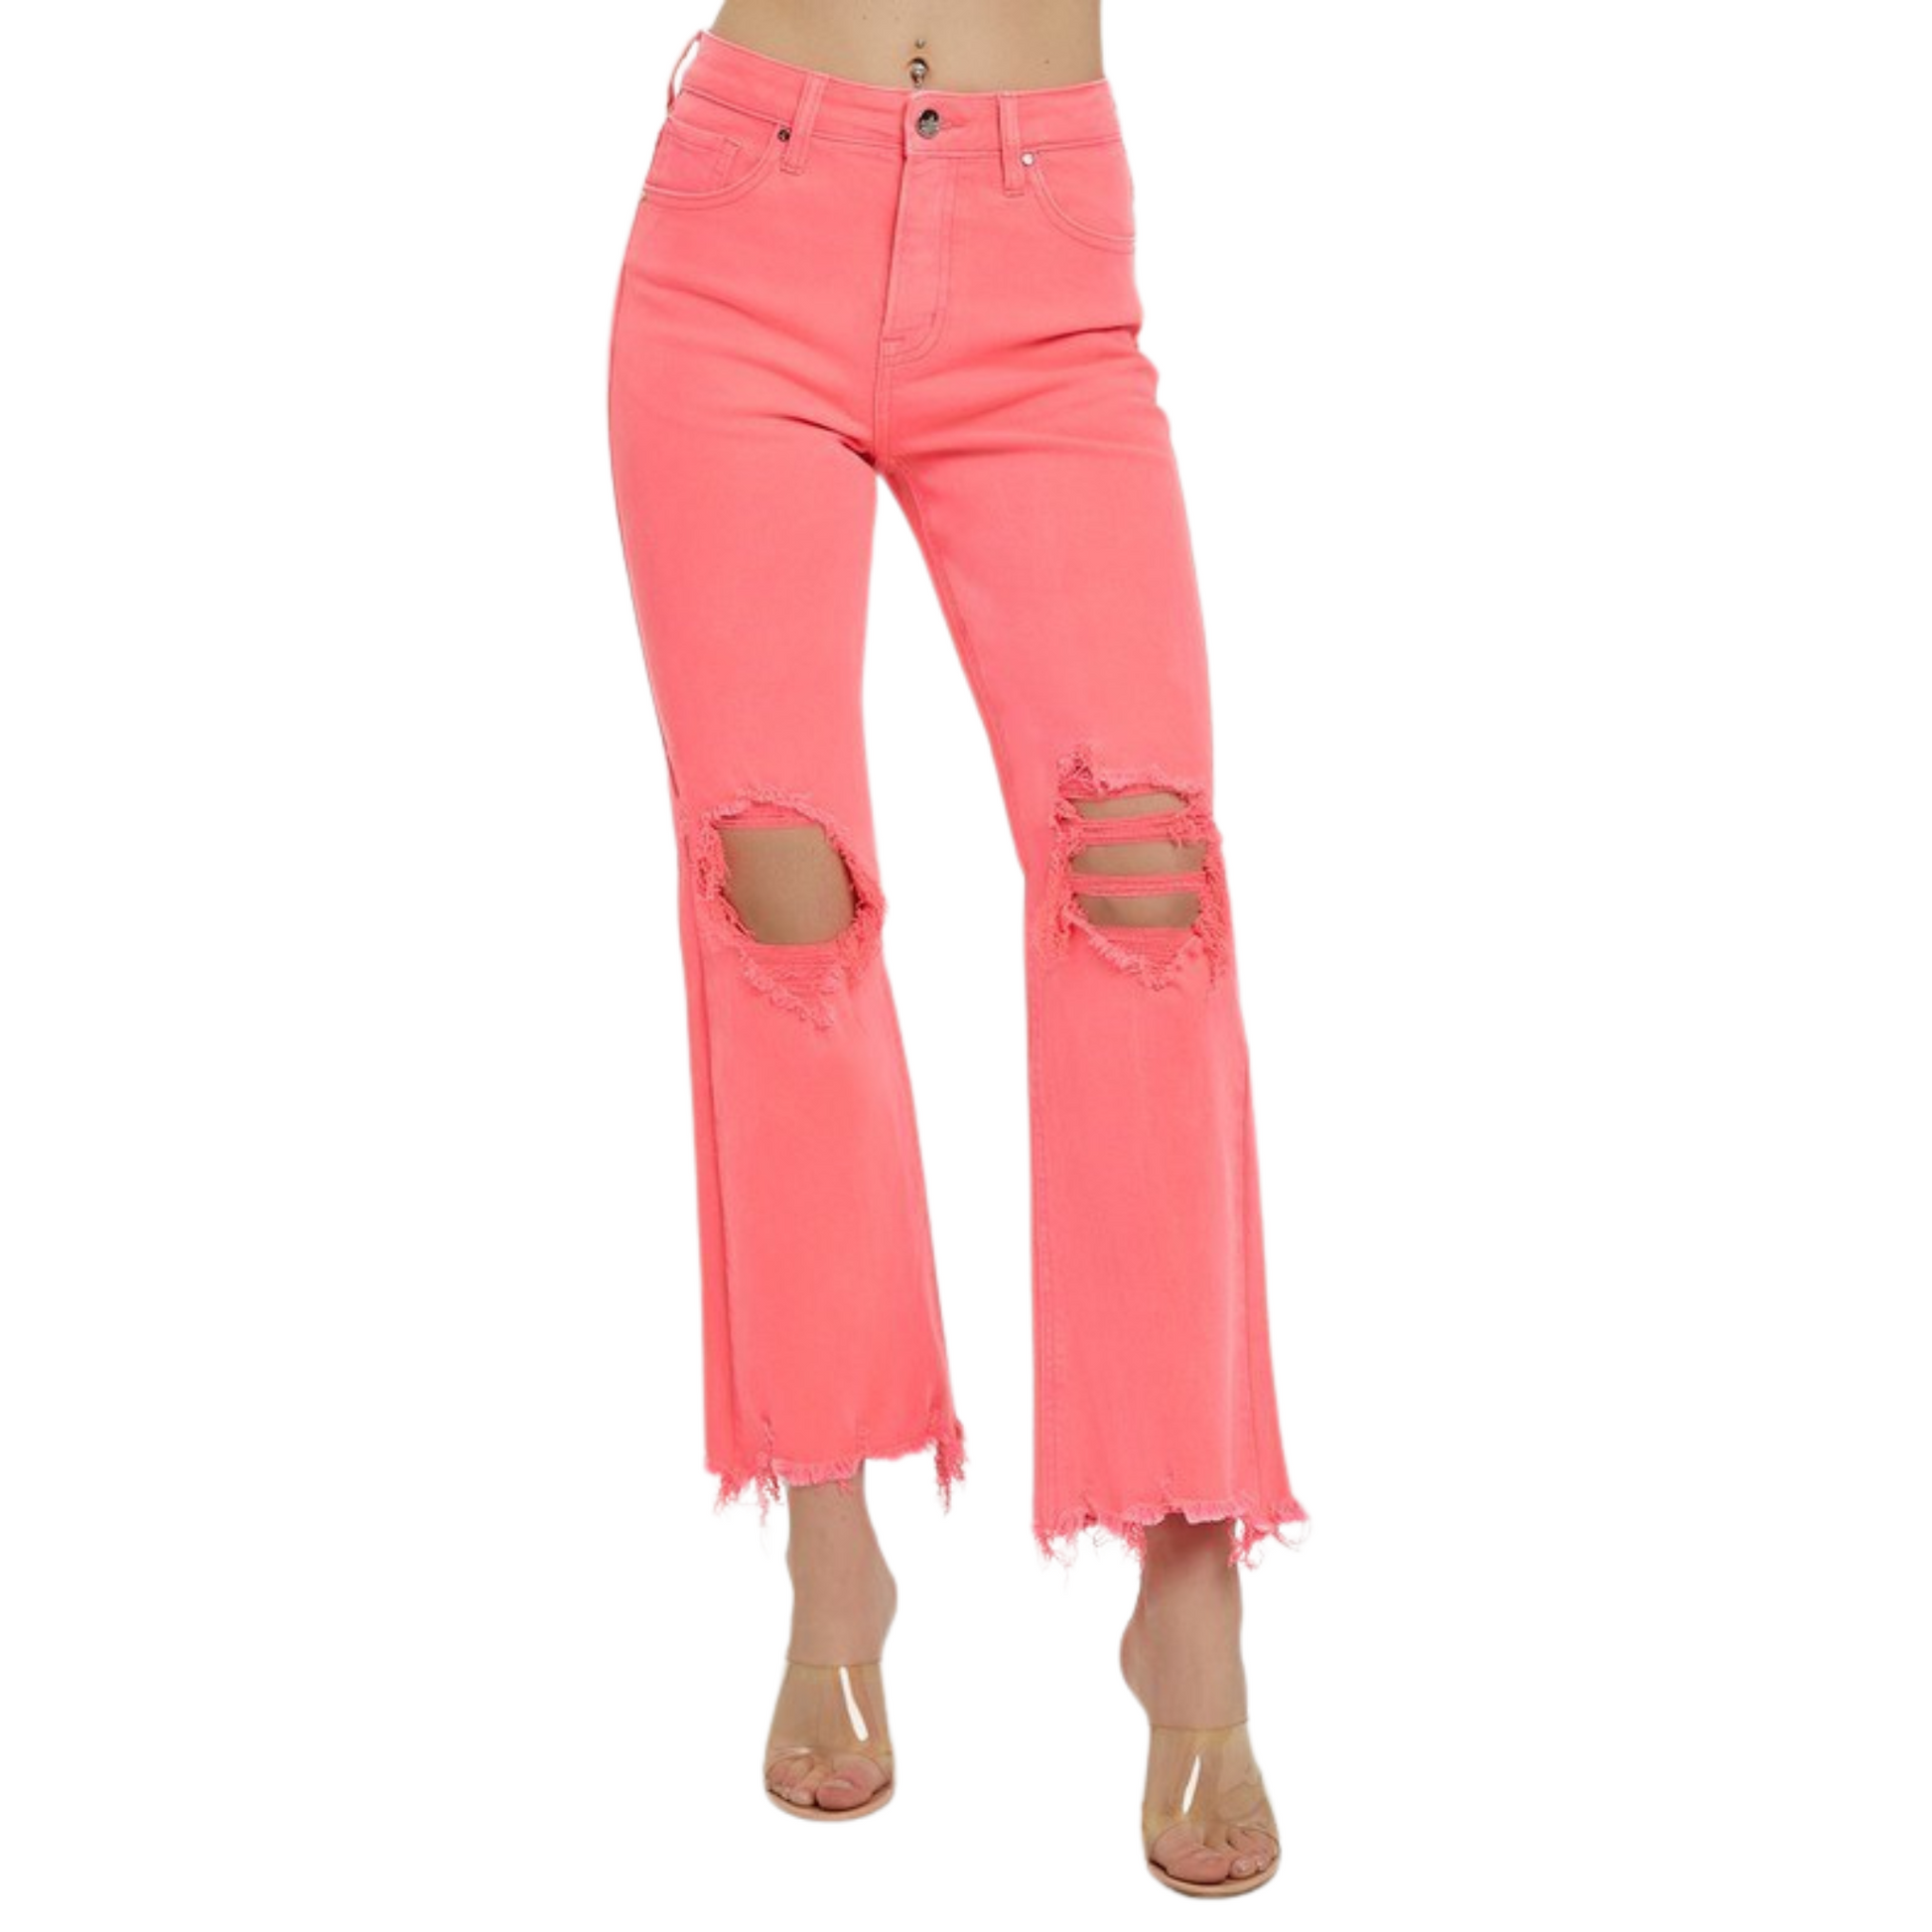 High rise distressed jeans in coral